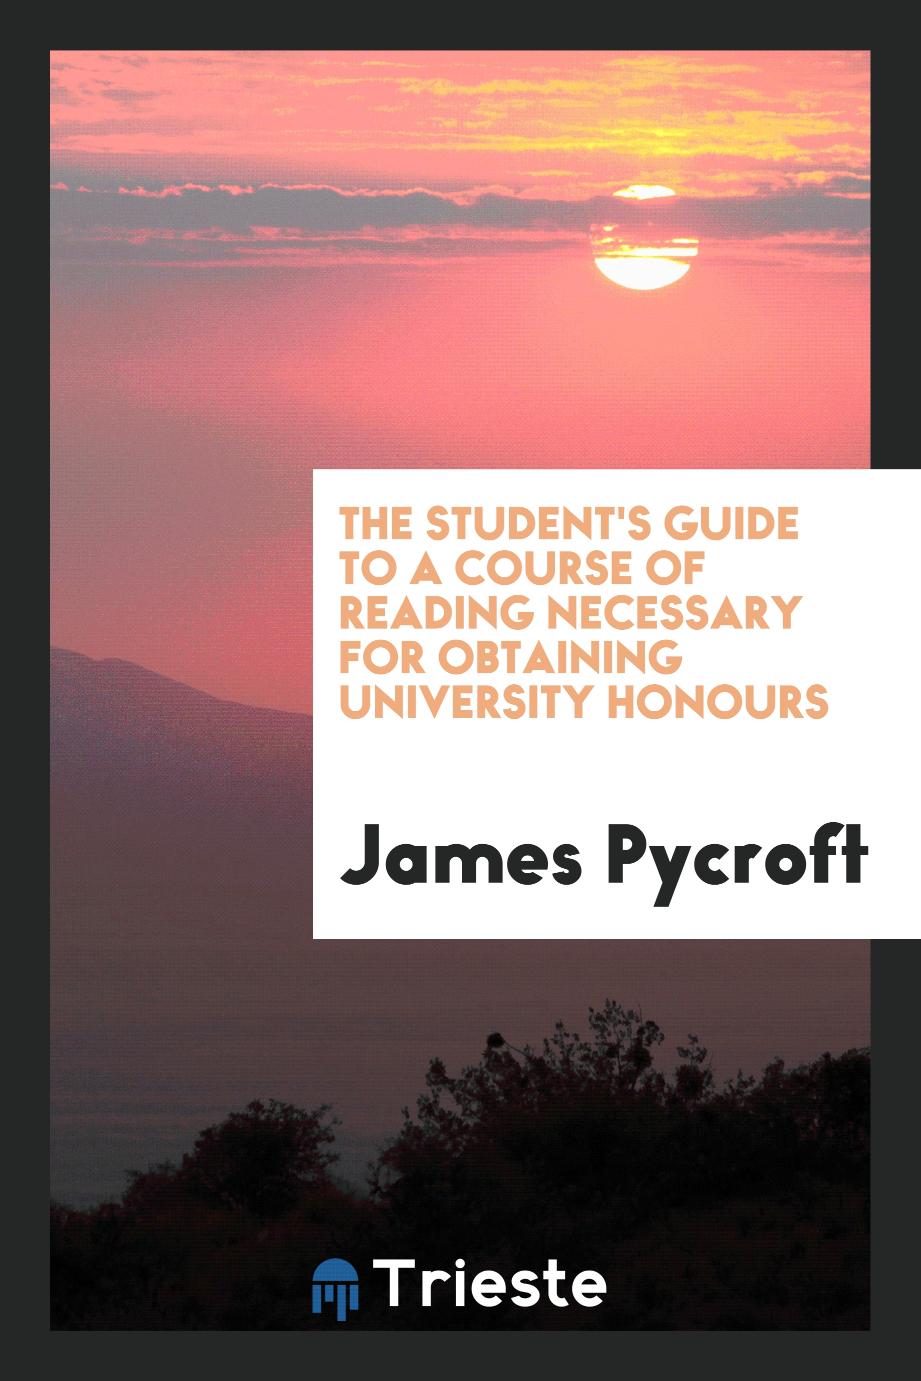 The Student's Guide to a Course of Reading Necessary for Obtaining University Honours